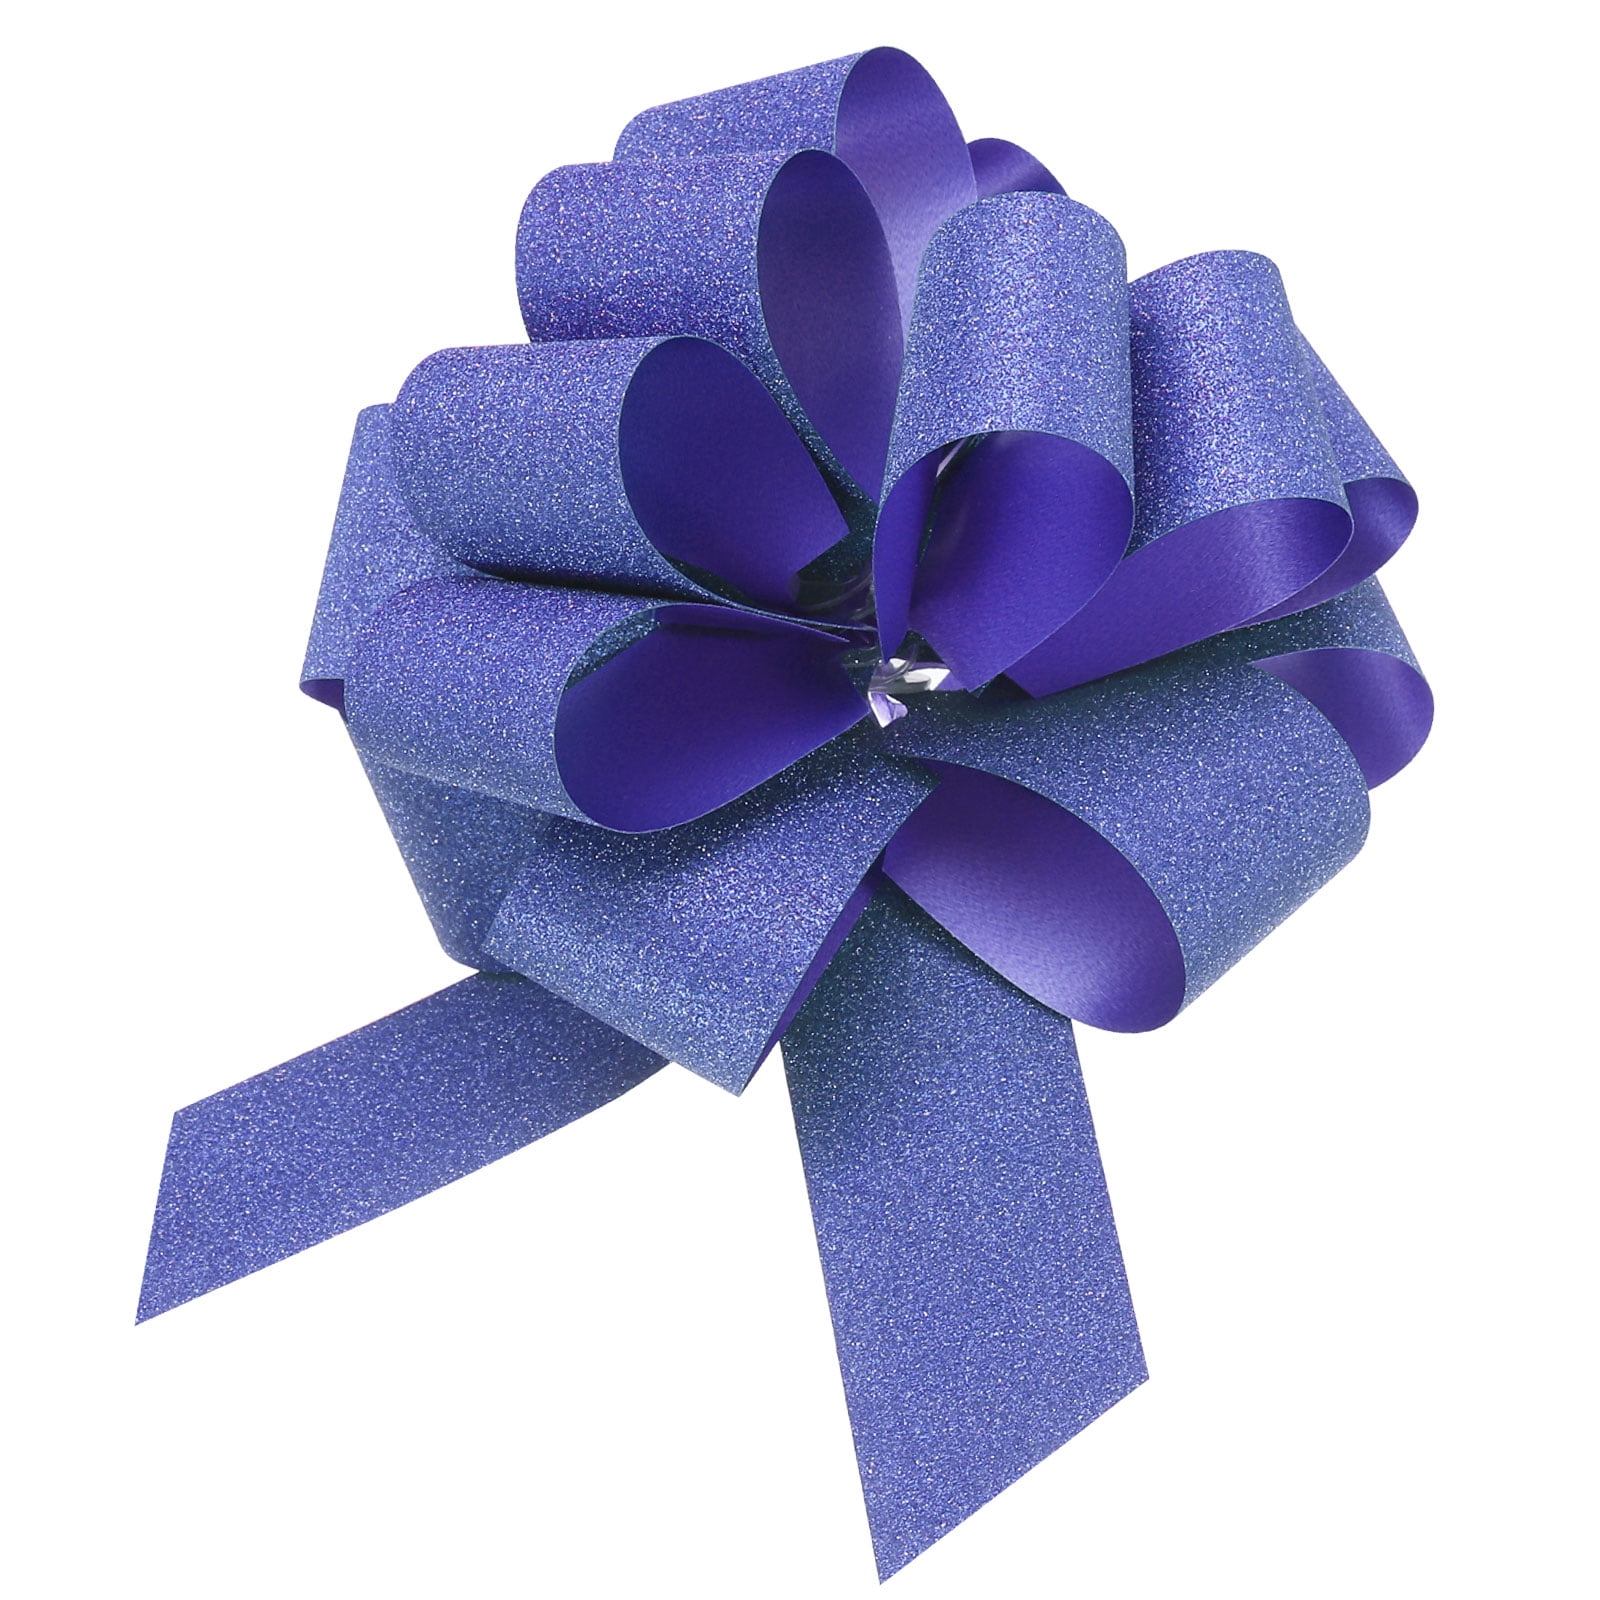 Double Faced Satin Ribbon 1.5 inch Cobalt Blue Ribbon 25 Yard Silk Fabric Ribbon Perfect for Gift Wrapping Wedding Decoration Bow Making DIY Crafts